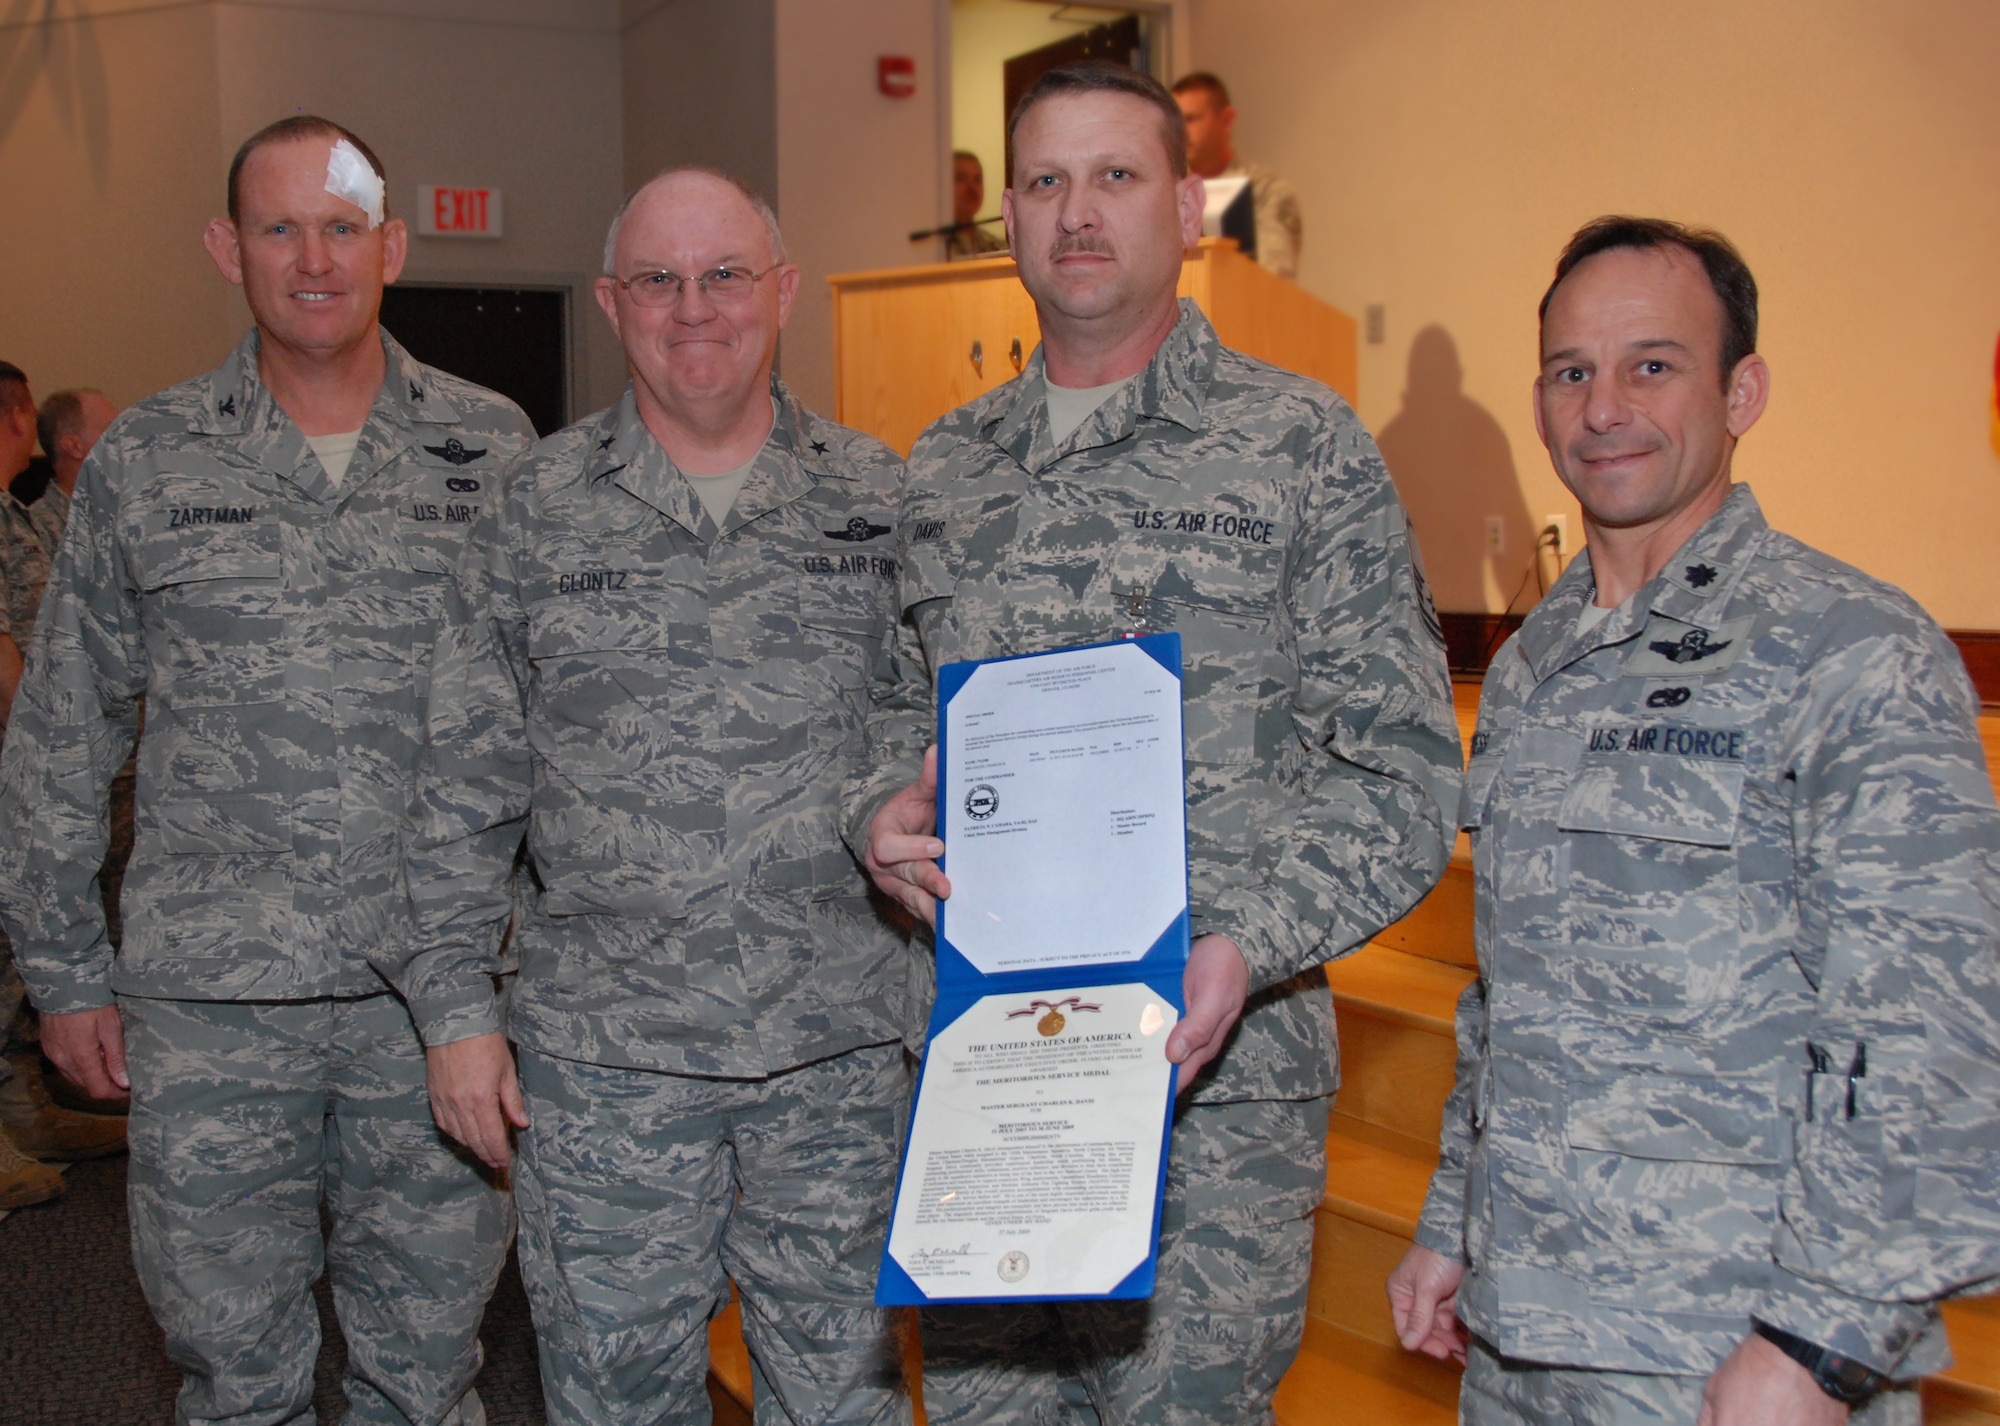 Master Sgt Chuck Davis, NCOIC of the Communications/Navigation section, was one of several Airmen awarded the Air Force meritorious service medal for his leadership and many years of dedication.  Honoring him are Col. David Zartman, Brig. Gen. Iwan Clontz, and Lt. Col. Lance Press. Photo by Master Sgt. Keith Dennis, 145th AW Public Affairs